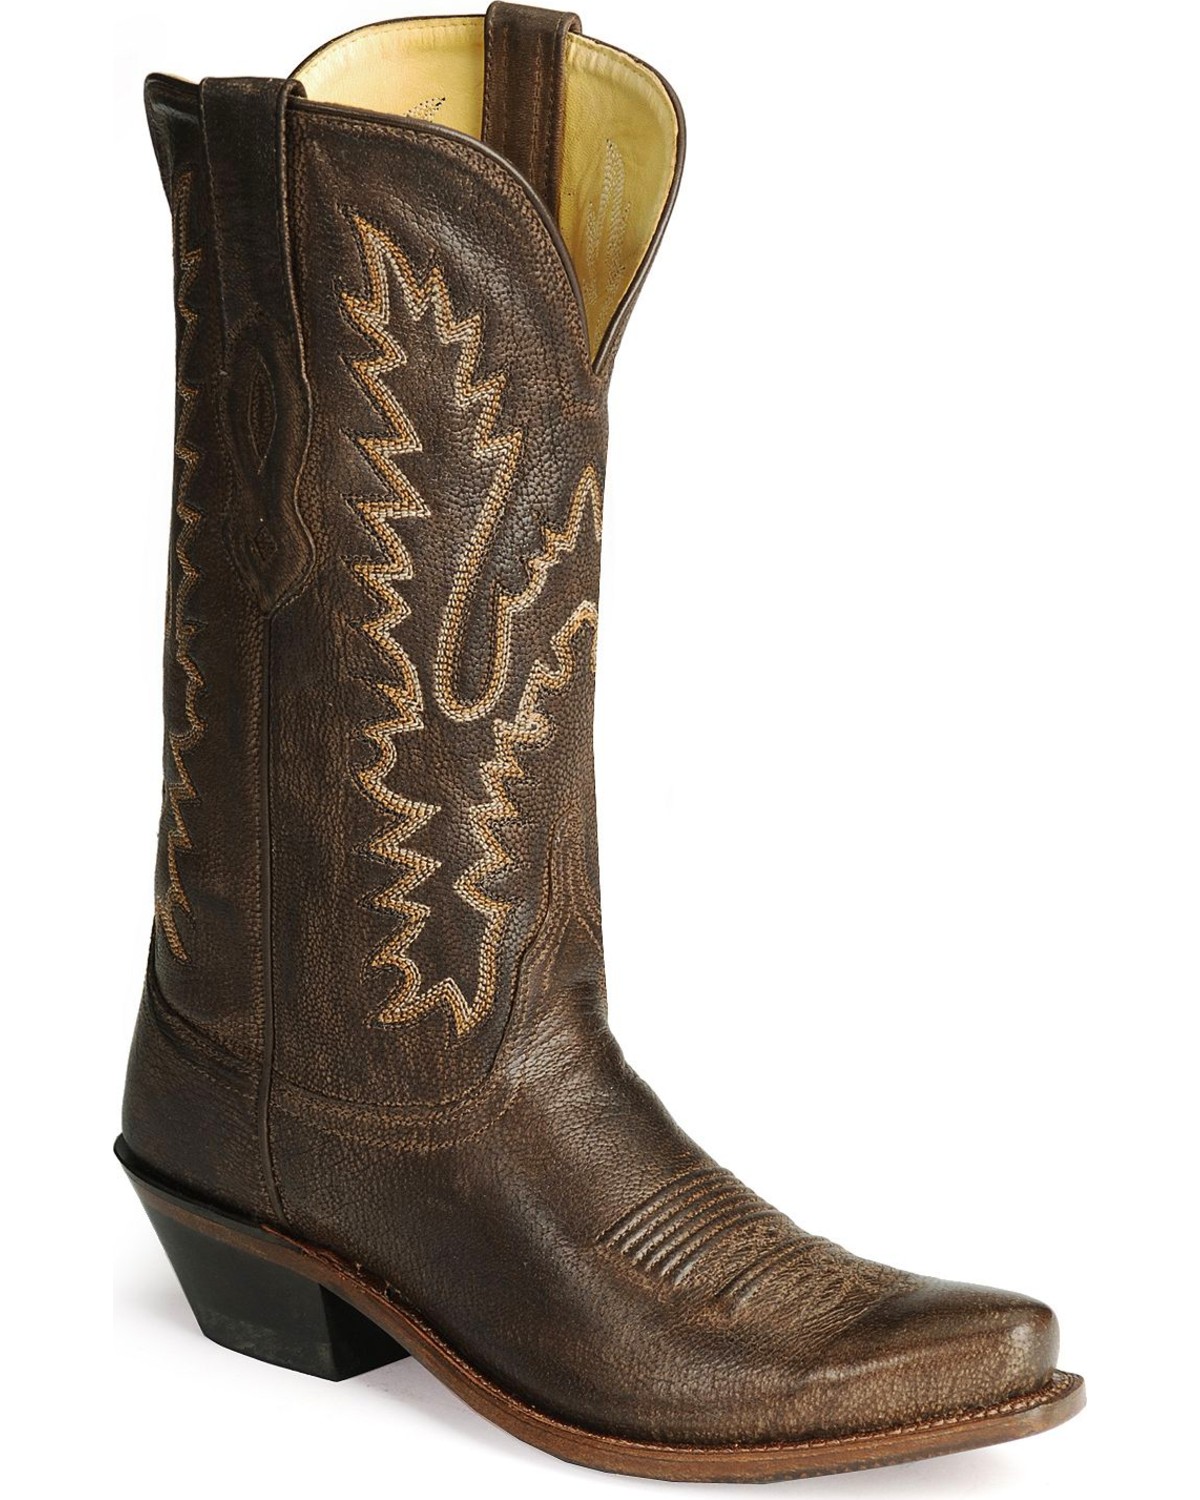 Old West Women's Fashion Western Boots